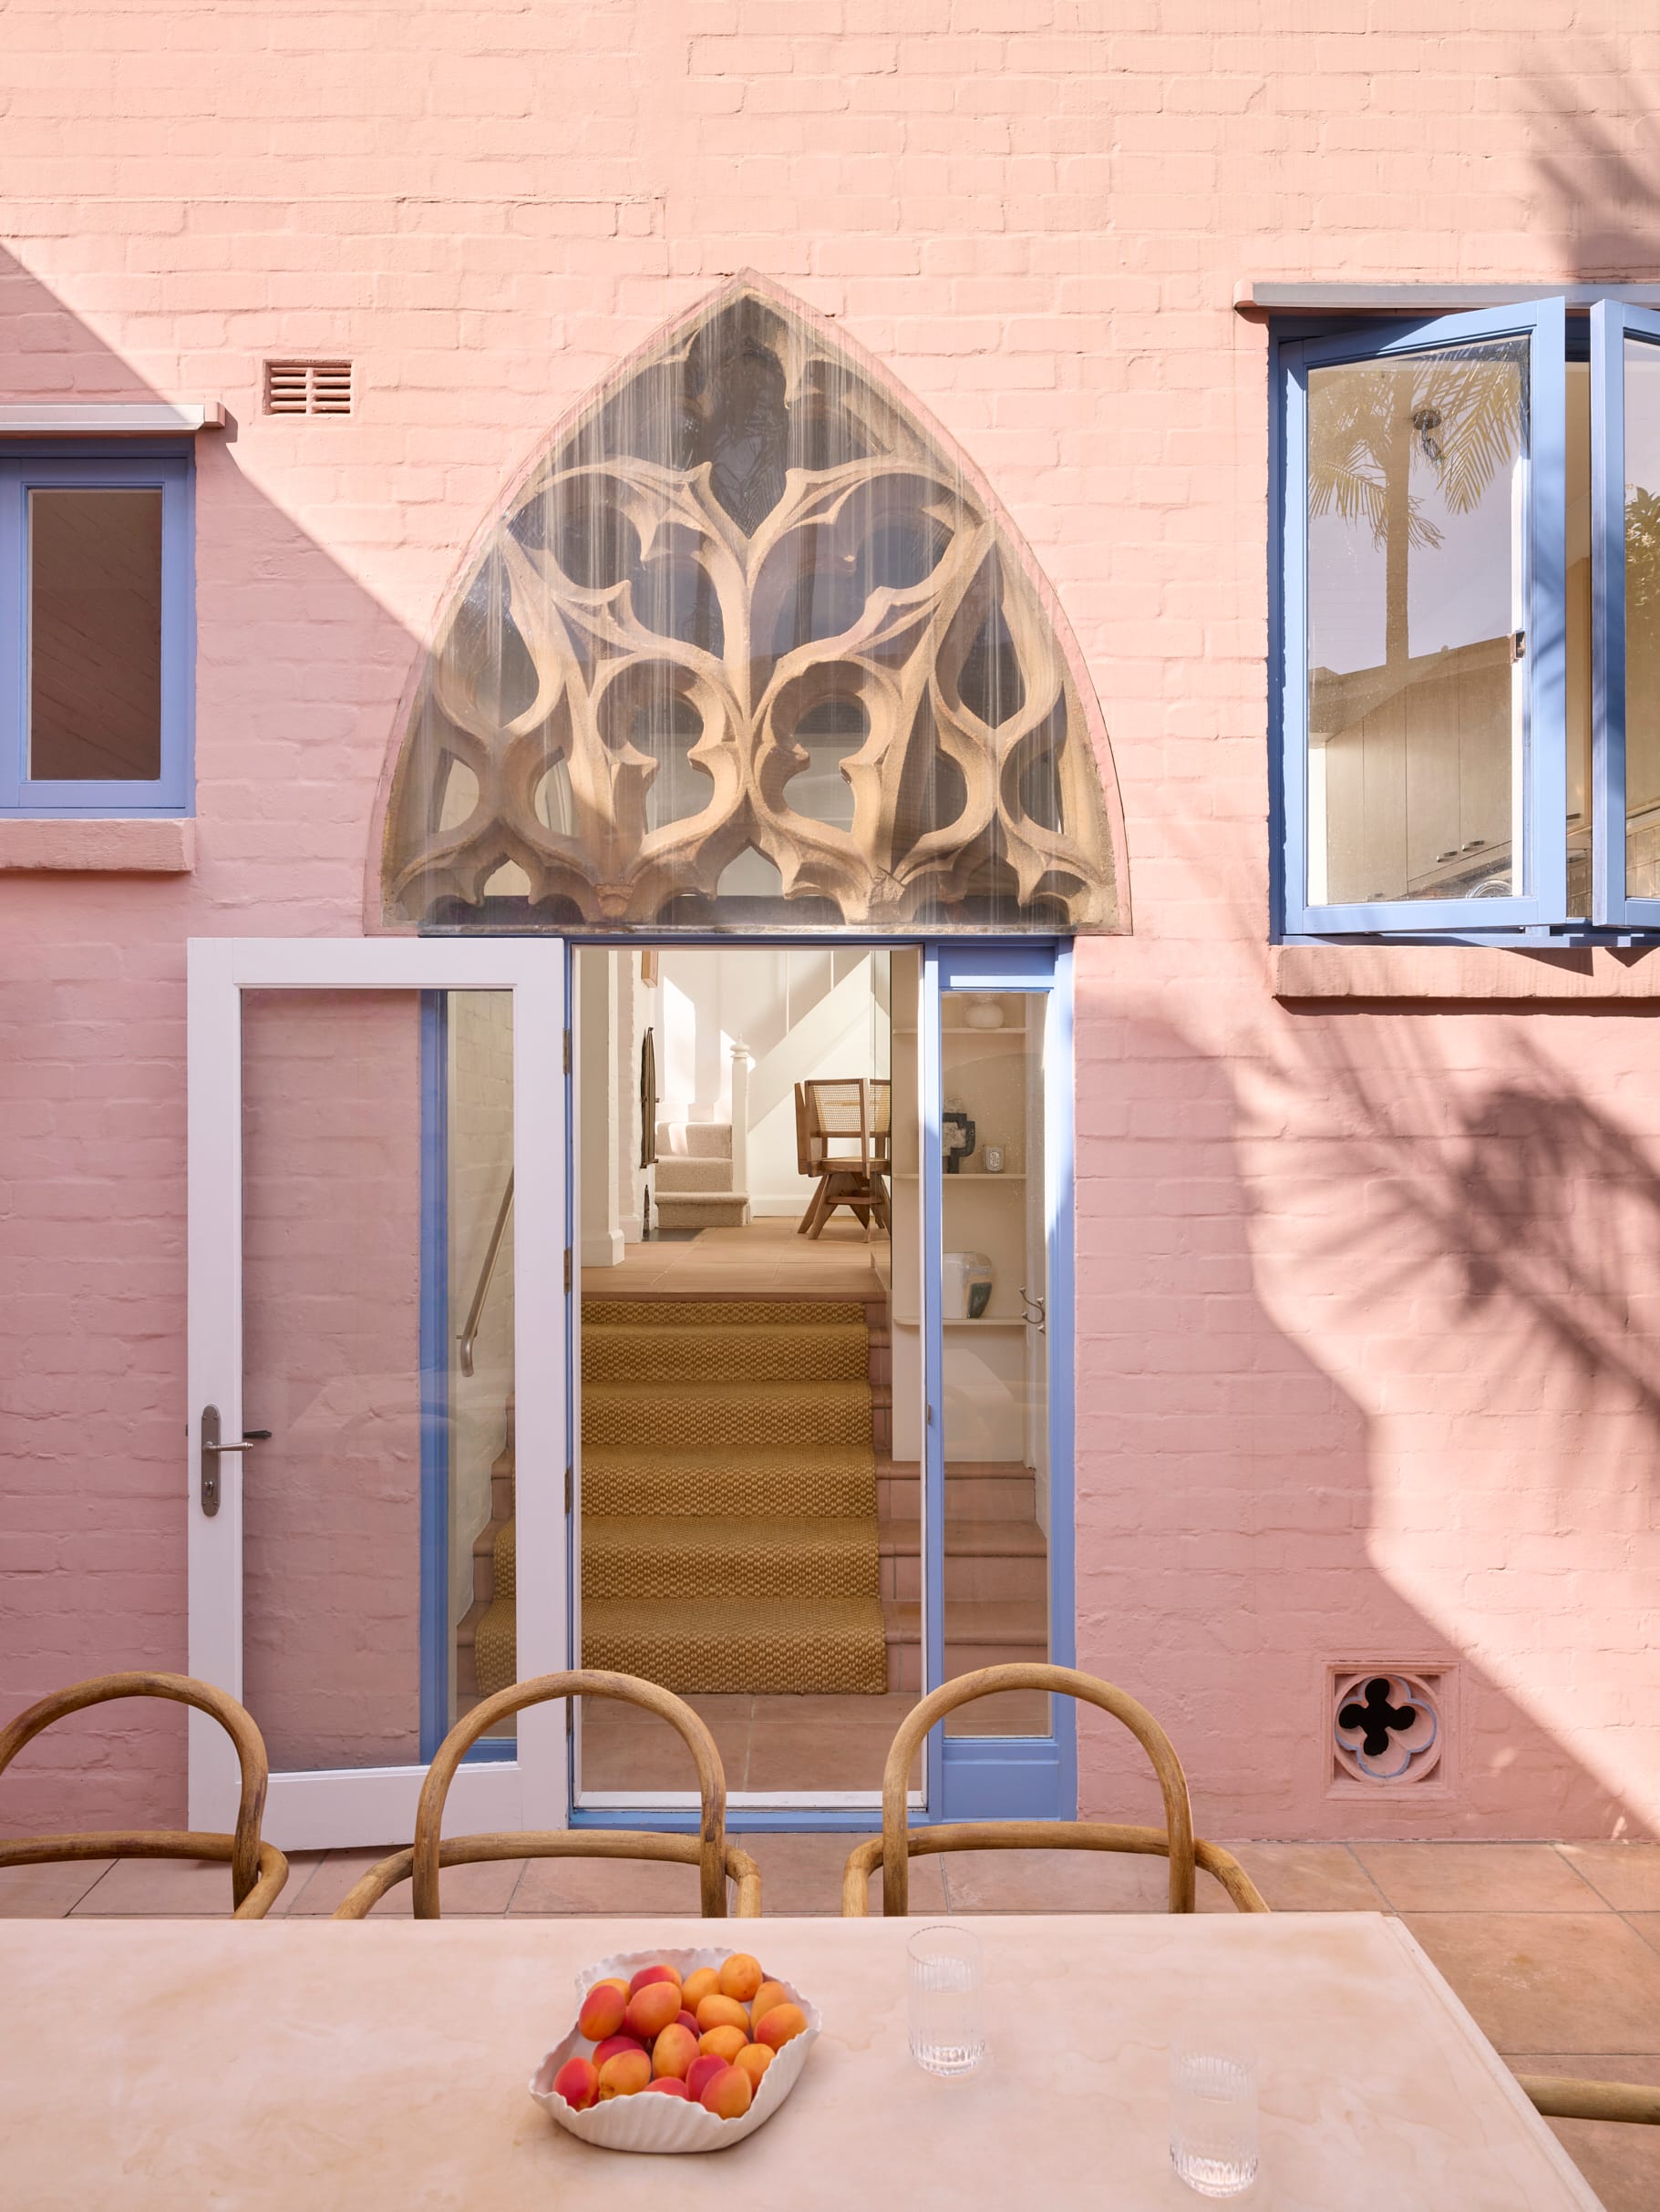 Chapel House by FURNISHD. Photography by Alicia Taylor. Gothic archway connecting inside and outside. Pink exterior brick walls with blue window and door frames. Dining table with cane chairs in foreground.  